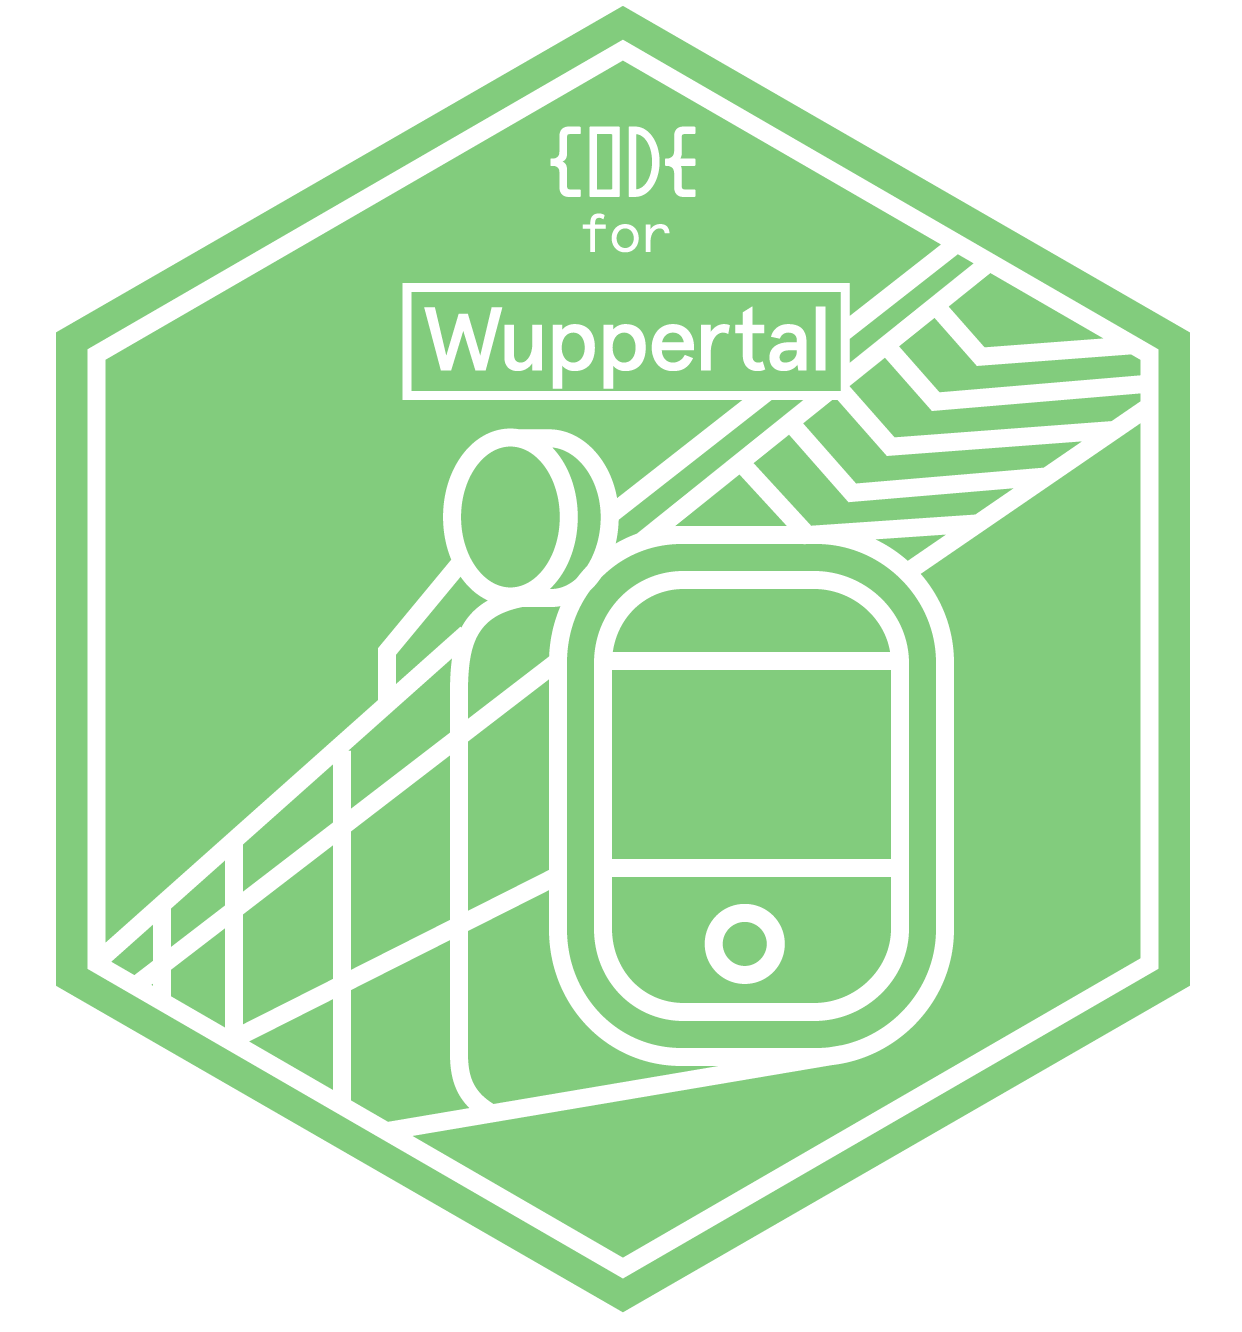 CodeFor-wuppertal